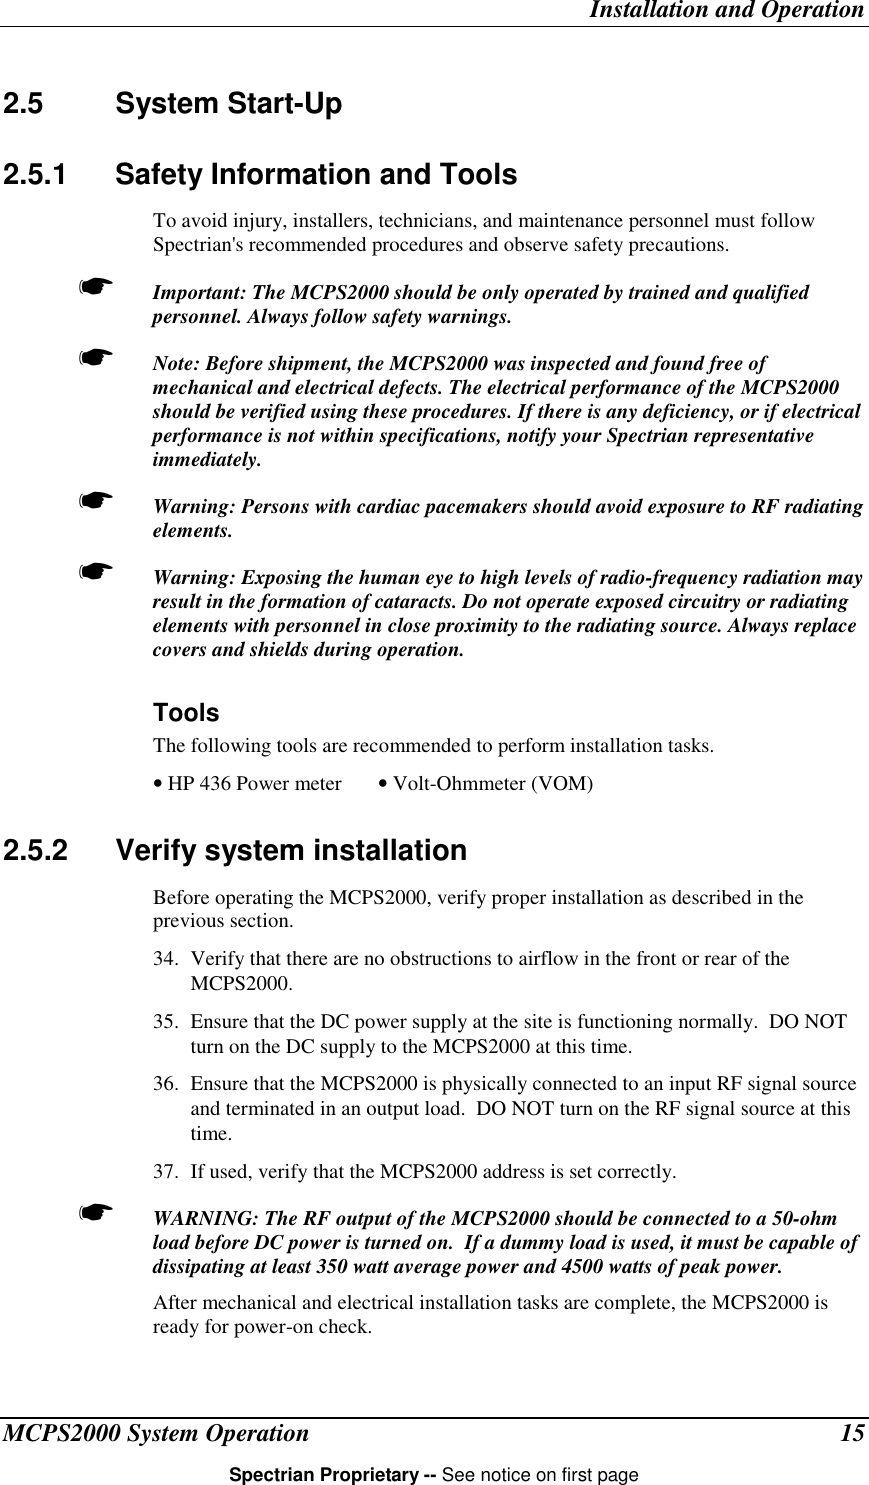 Installation and OperationMCPS2000 System Operation 15Spectrian Proprietary -- See notice on first page2.5 System Start-Up2.5.1  Safety Information and ToolsTo avoid injury, installers, technicians, and maintenance personnel must followSpectrian&apos;s recommended procedures and observe safety precautions.☛ Important: The MCPS2000 should be only operated by trained and qualifiedpersonnel. Always follow safety warnings.☛ Note: Before shipment, the MCPS2000 was inspected and found free ofmechanical and electrical defects. The electrical performance of the MCPS2000should be verified using these procedures. If there is any deficiency, or if electricalperformance is not within specifications, notify your Spectrian representativeimmediately.☛ Warning: Persons with cardiac pacemakers should avoid exposure to RF radiatingelements.☛ Warning: Exposing the human eye to high levels of radio-frequency radiation mayresult in the formation of cataracts. Do not operate exposed circuitry or radiatingelements with personnel in close proximity to the radiating source. Always replacecovers and shields during operation.ToolsThe following tools are recommended to perform installation tasks.• HP 436 Power meter • Volt-Ohmmeter (VOM)2.5.2  Verify system installationBefore operating the MCPS2000, verify proper installation as described in theprevious section.34. Verify that there are no obstructions to airflow in the front or rear of theMCPS2000.35. Ensure that the DC power supply at the site is functioning normally.  DO NOTturn on the DC supply to the MCPS2000 at this time.36. Ensure that the MCPS2000 is physically connected to an input RF signal sourceand terminated in an output load.  DO NOT turn on the RF signal source at thistime.37. If used, verify that the MCPS2000 address is set correctly.☛ WARNING: The RF output of the MCPS2000 should be connected to a 50-ohmload before DC power is turned on.  If a dummy load is used, it must be capable ofdissipating at least 350 watt average power and 4500 watts of peak power.After mechanical and electrical installation tasks are complete, the MCPS2000 isready for power-on check.